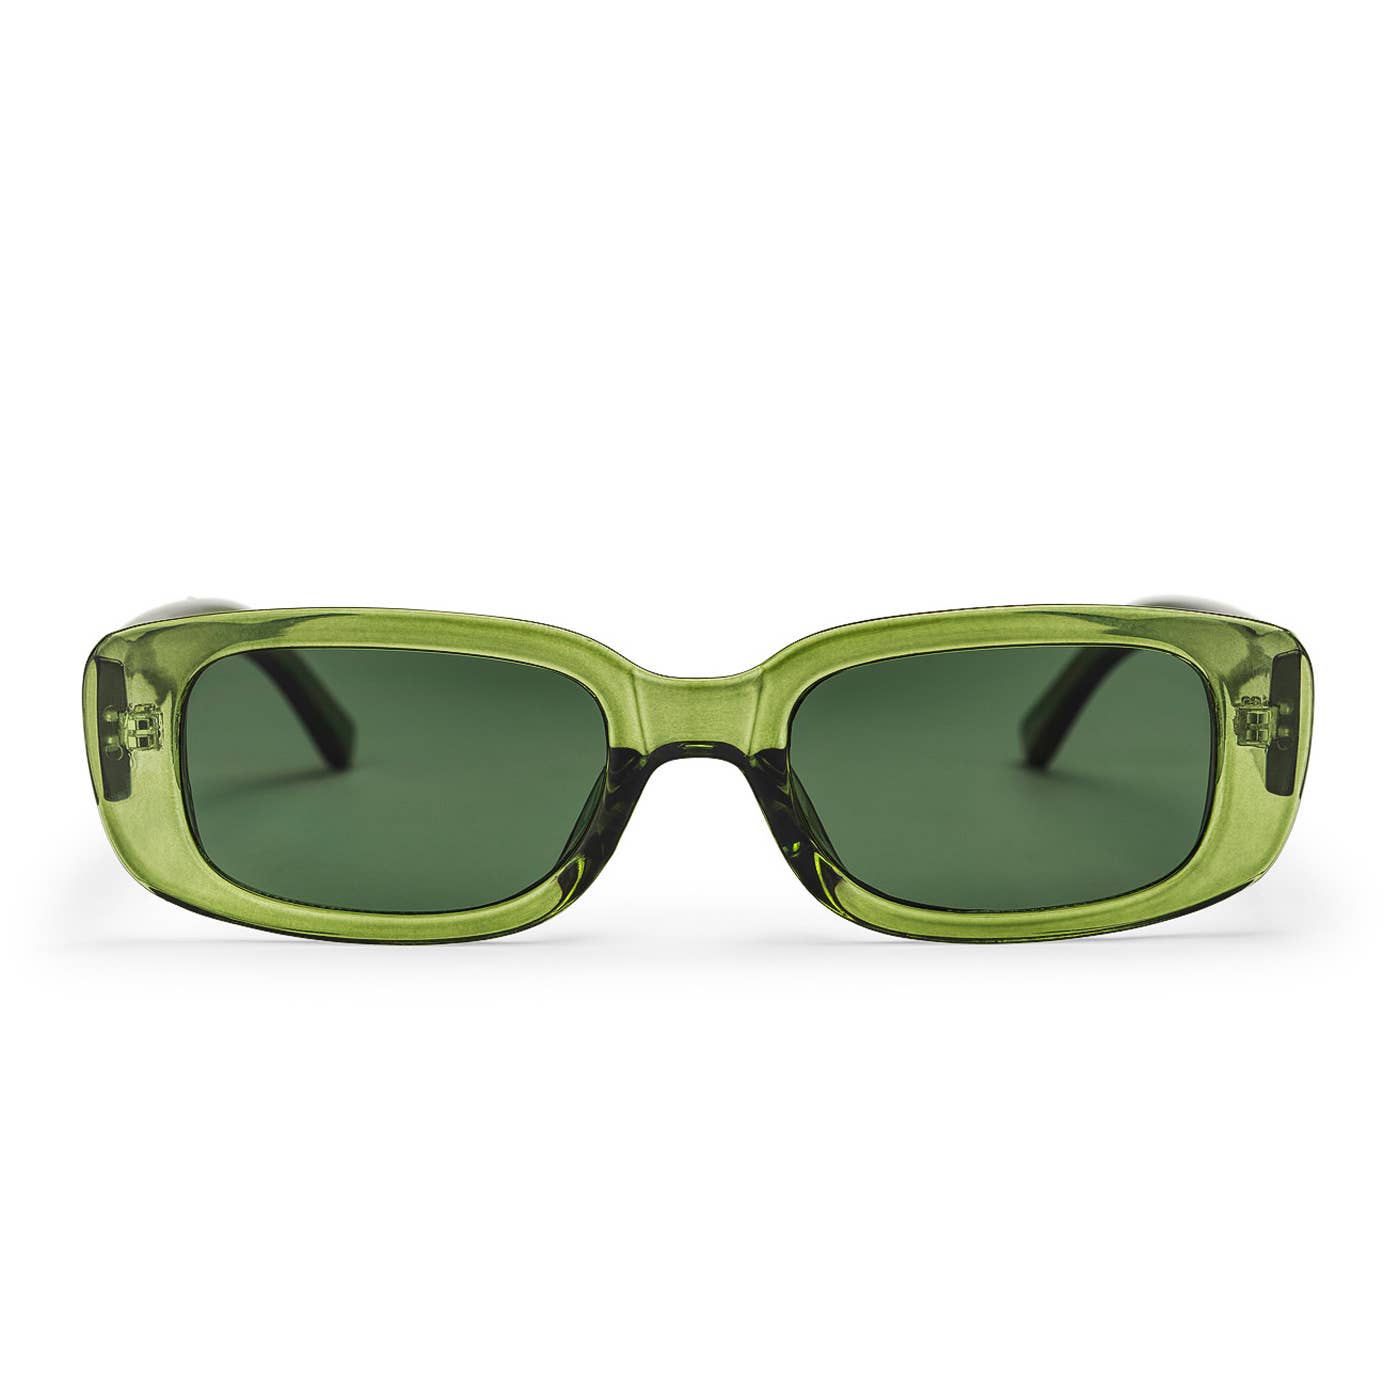 Nicole forest green recycled sunglasses